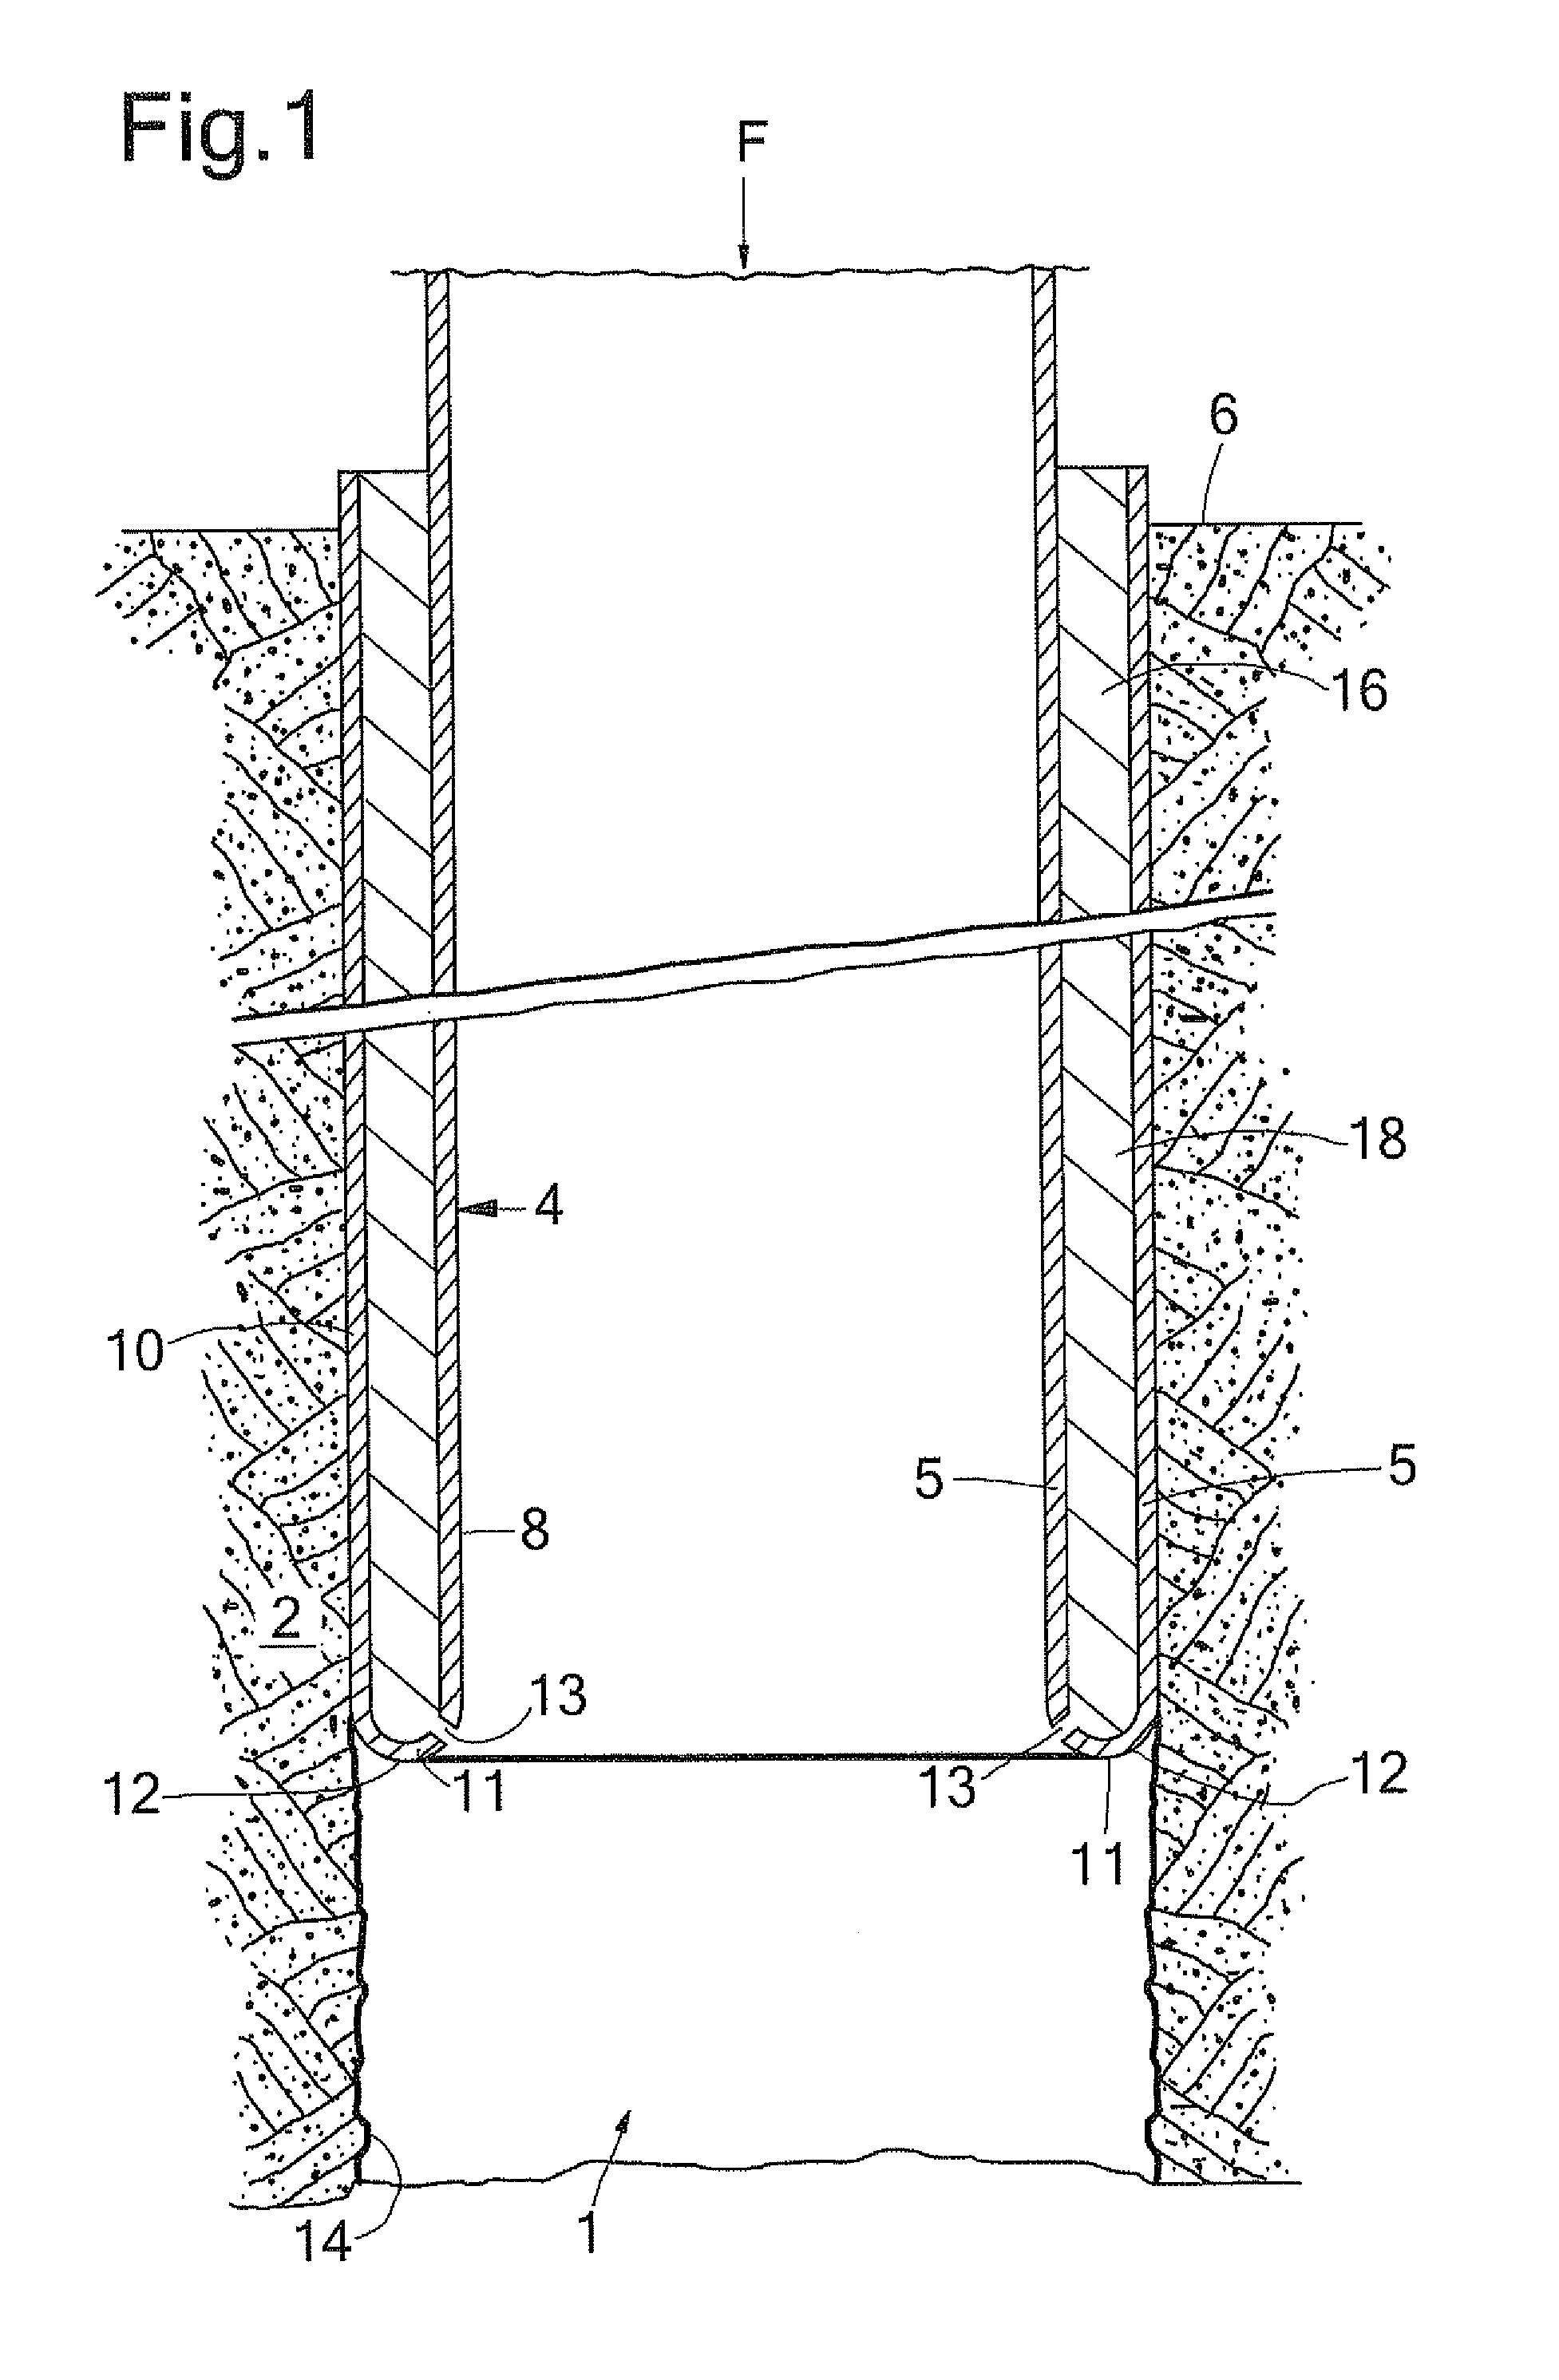 Method of expanding a tubular element in a wellbore